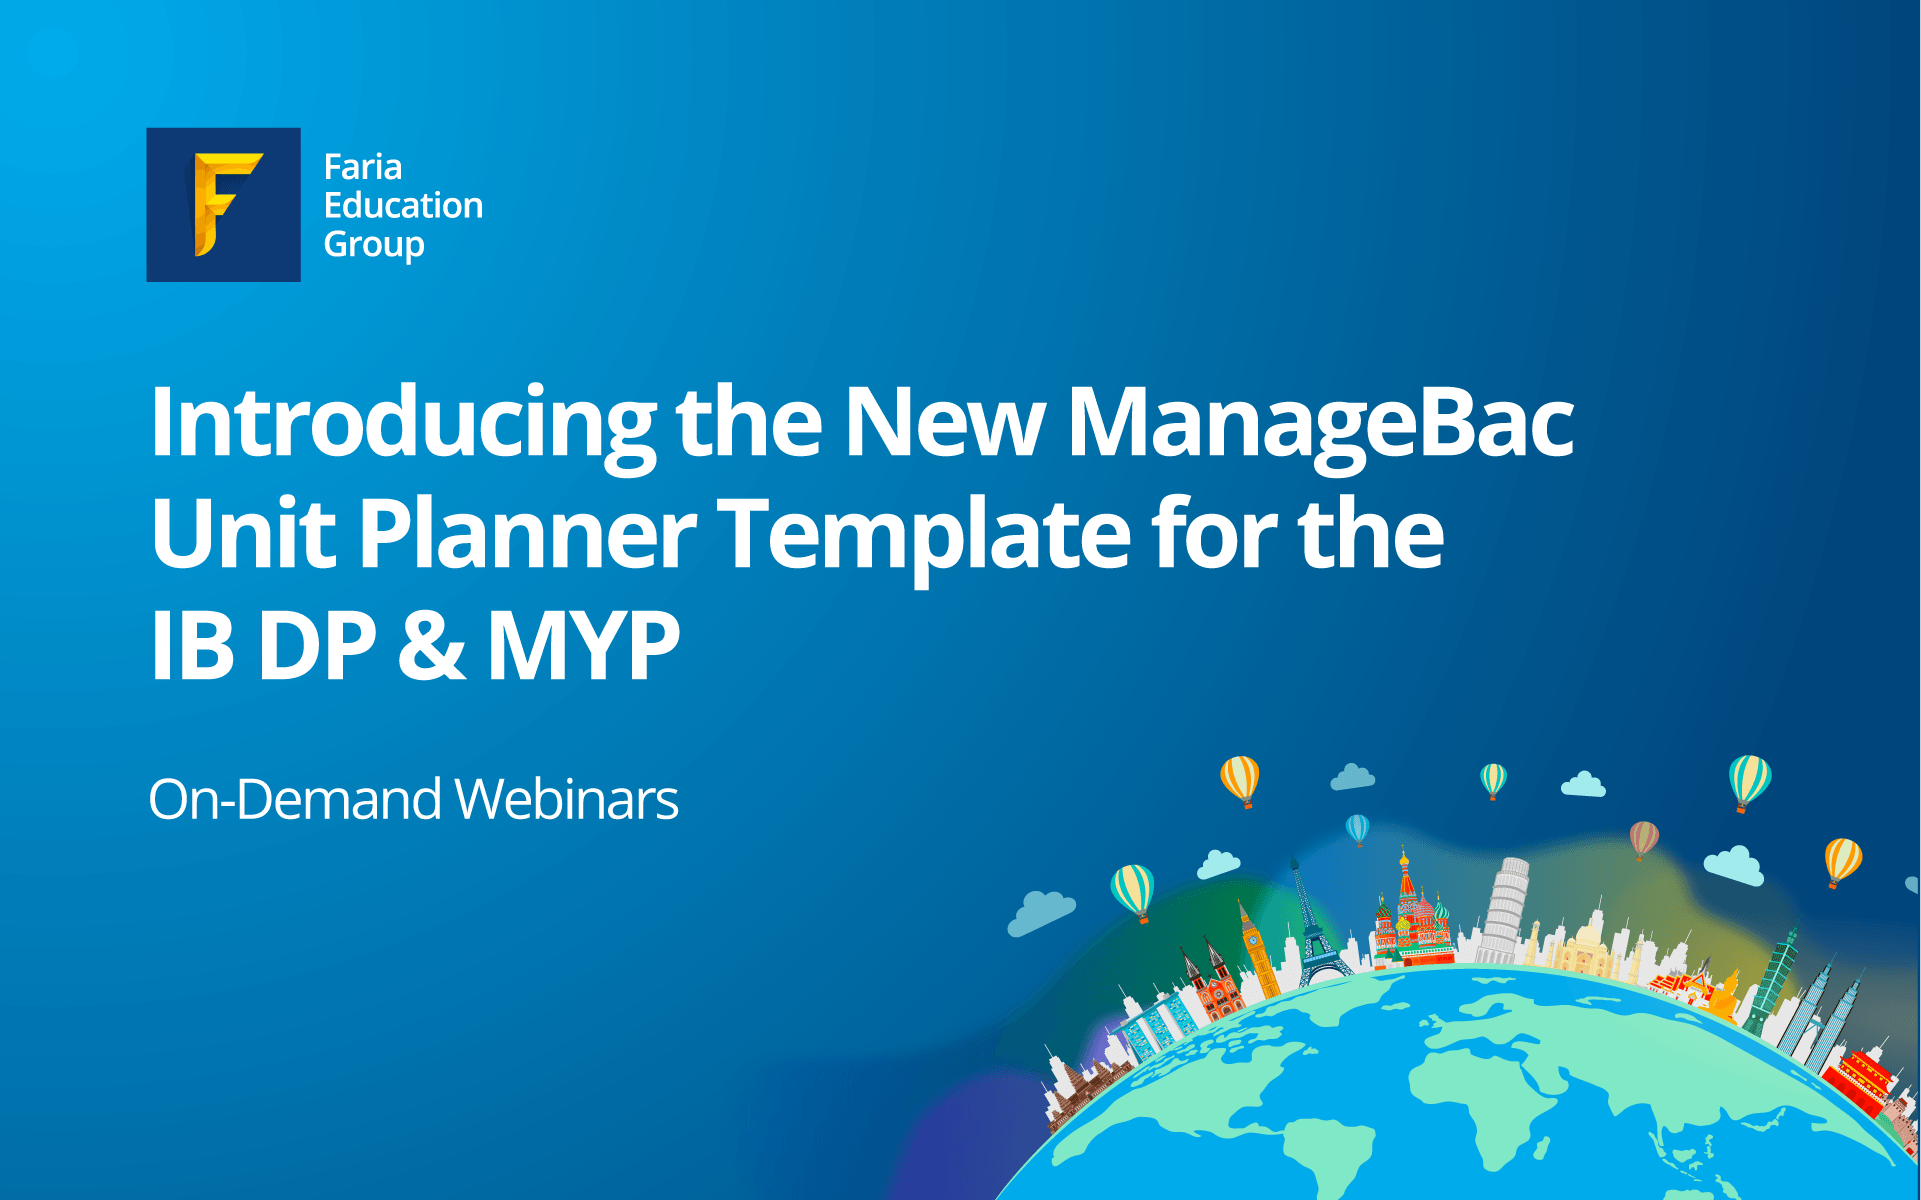 Introducing the new ManageBac unit planner template for the IB DP & MYP